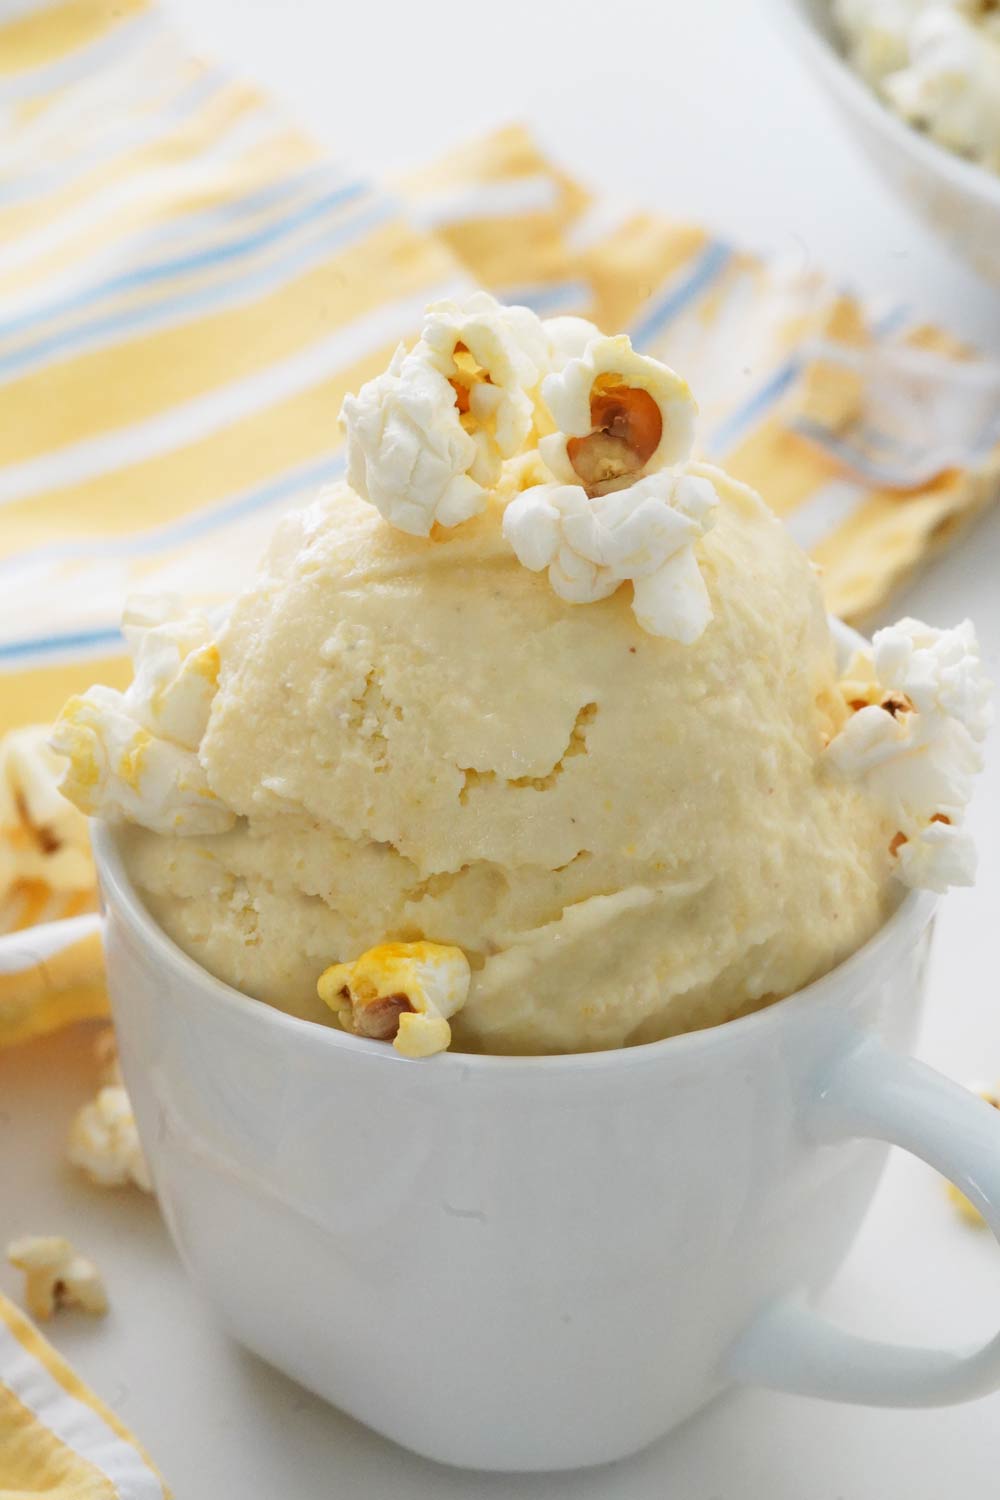 Popcorn ice cream in a bowl with popcorn on top